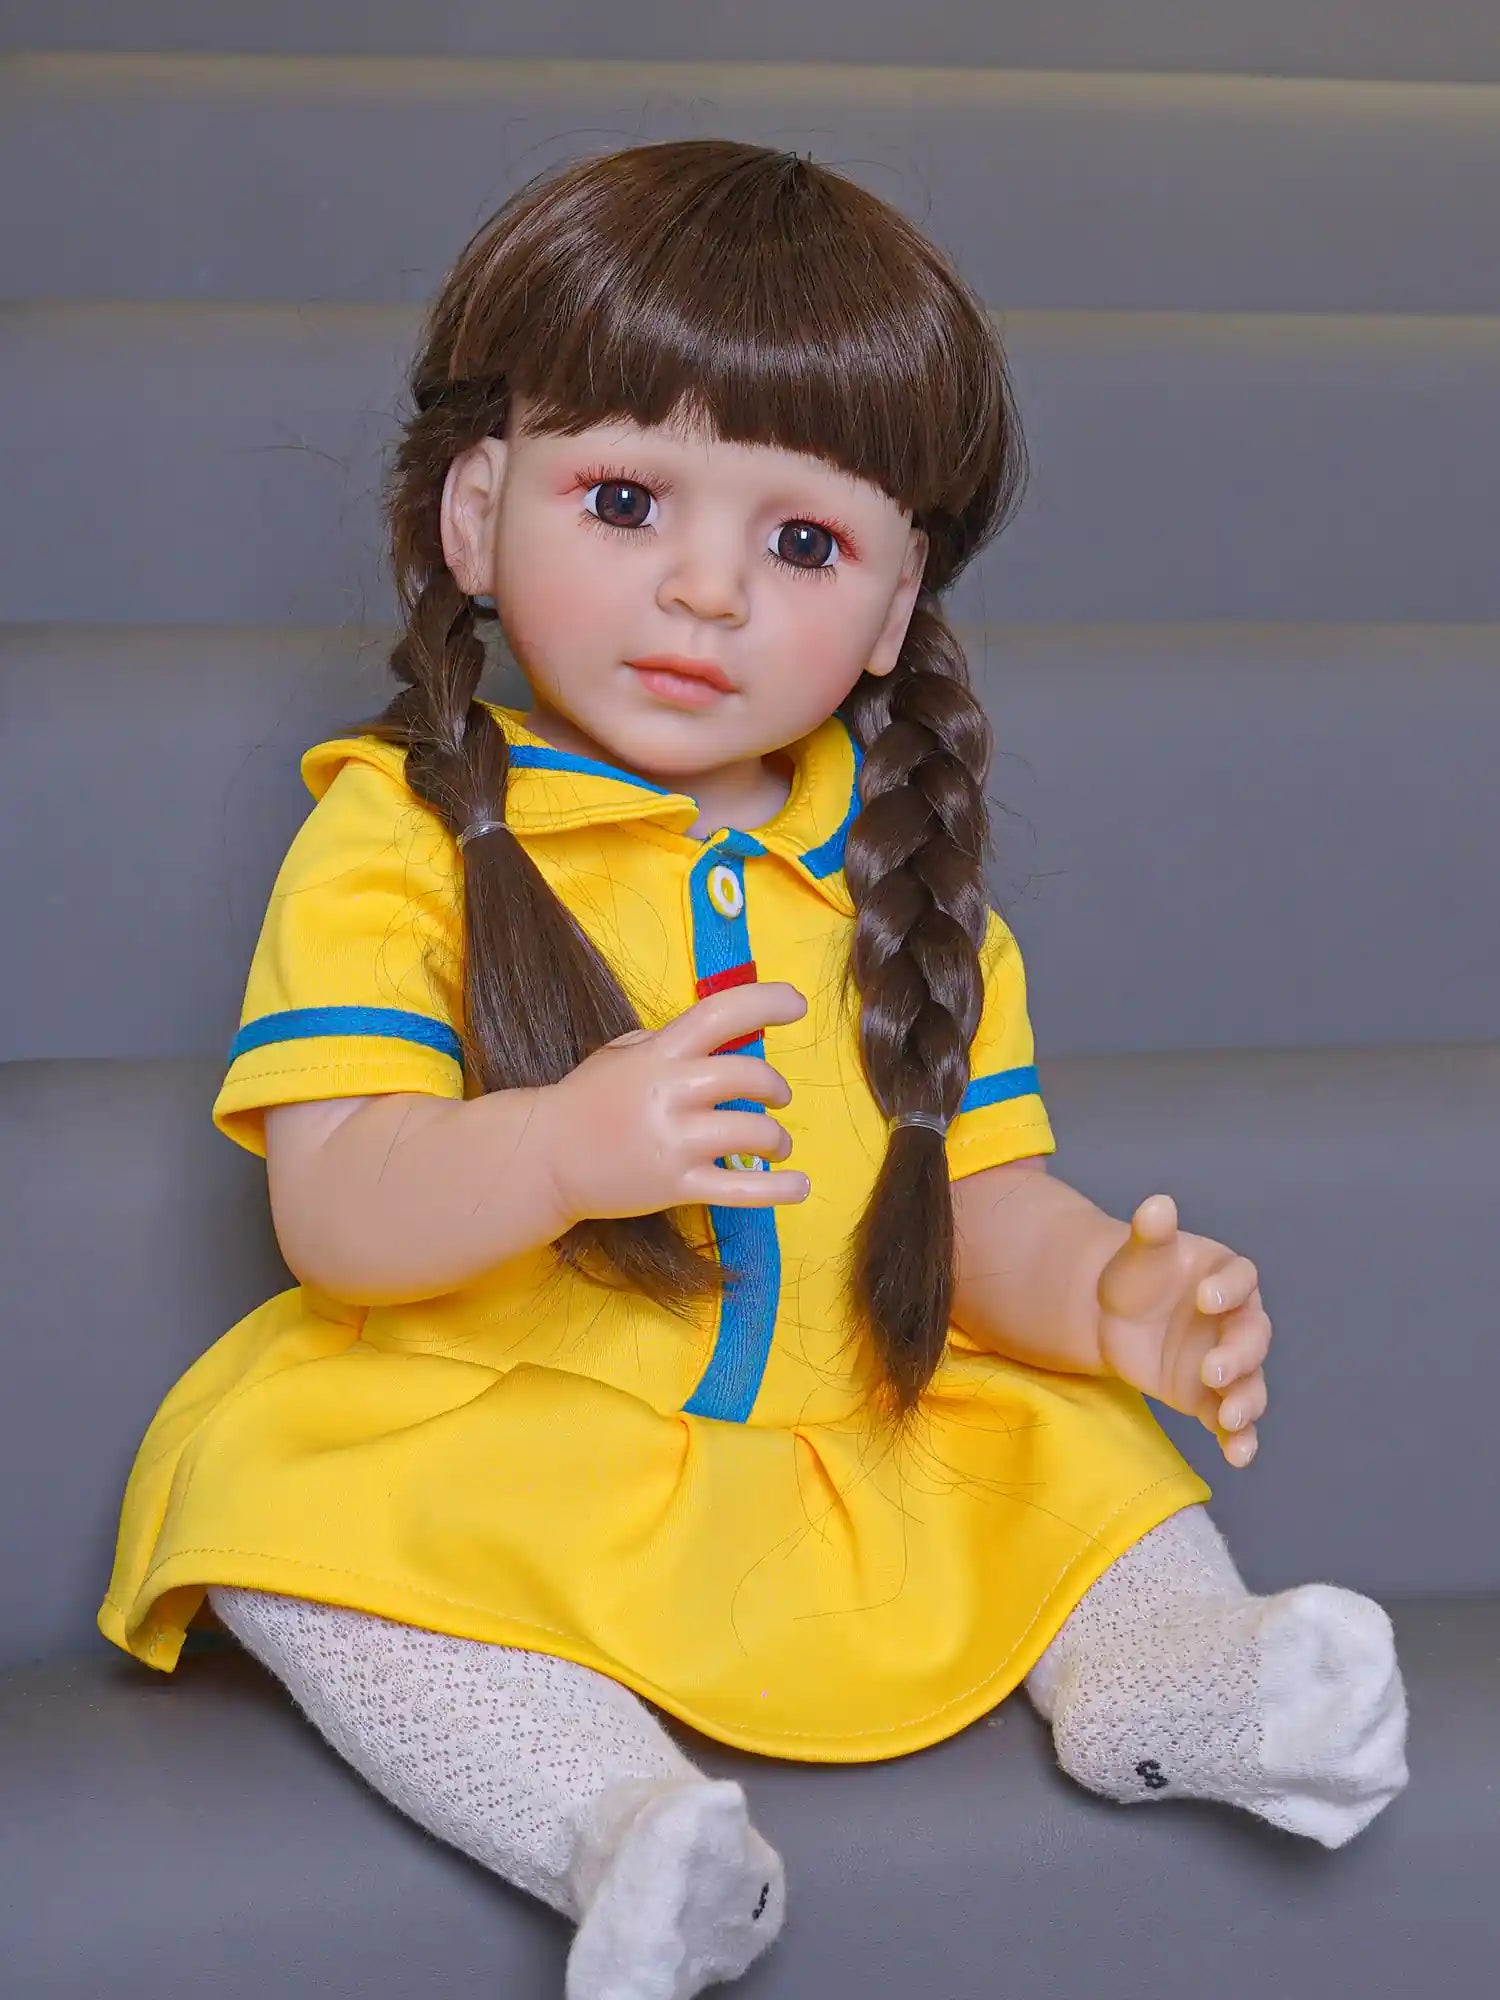 A charming doll featuring glossy braids, donning a yellow sporty dress, capturing the innocence of childhood in a nursery.